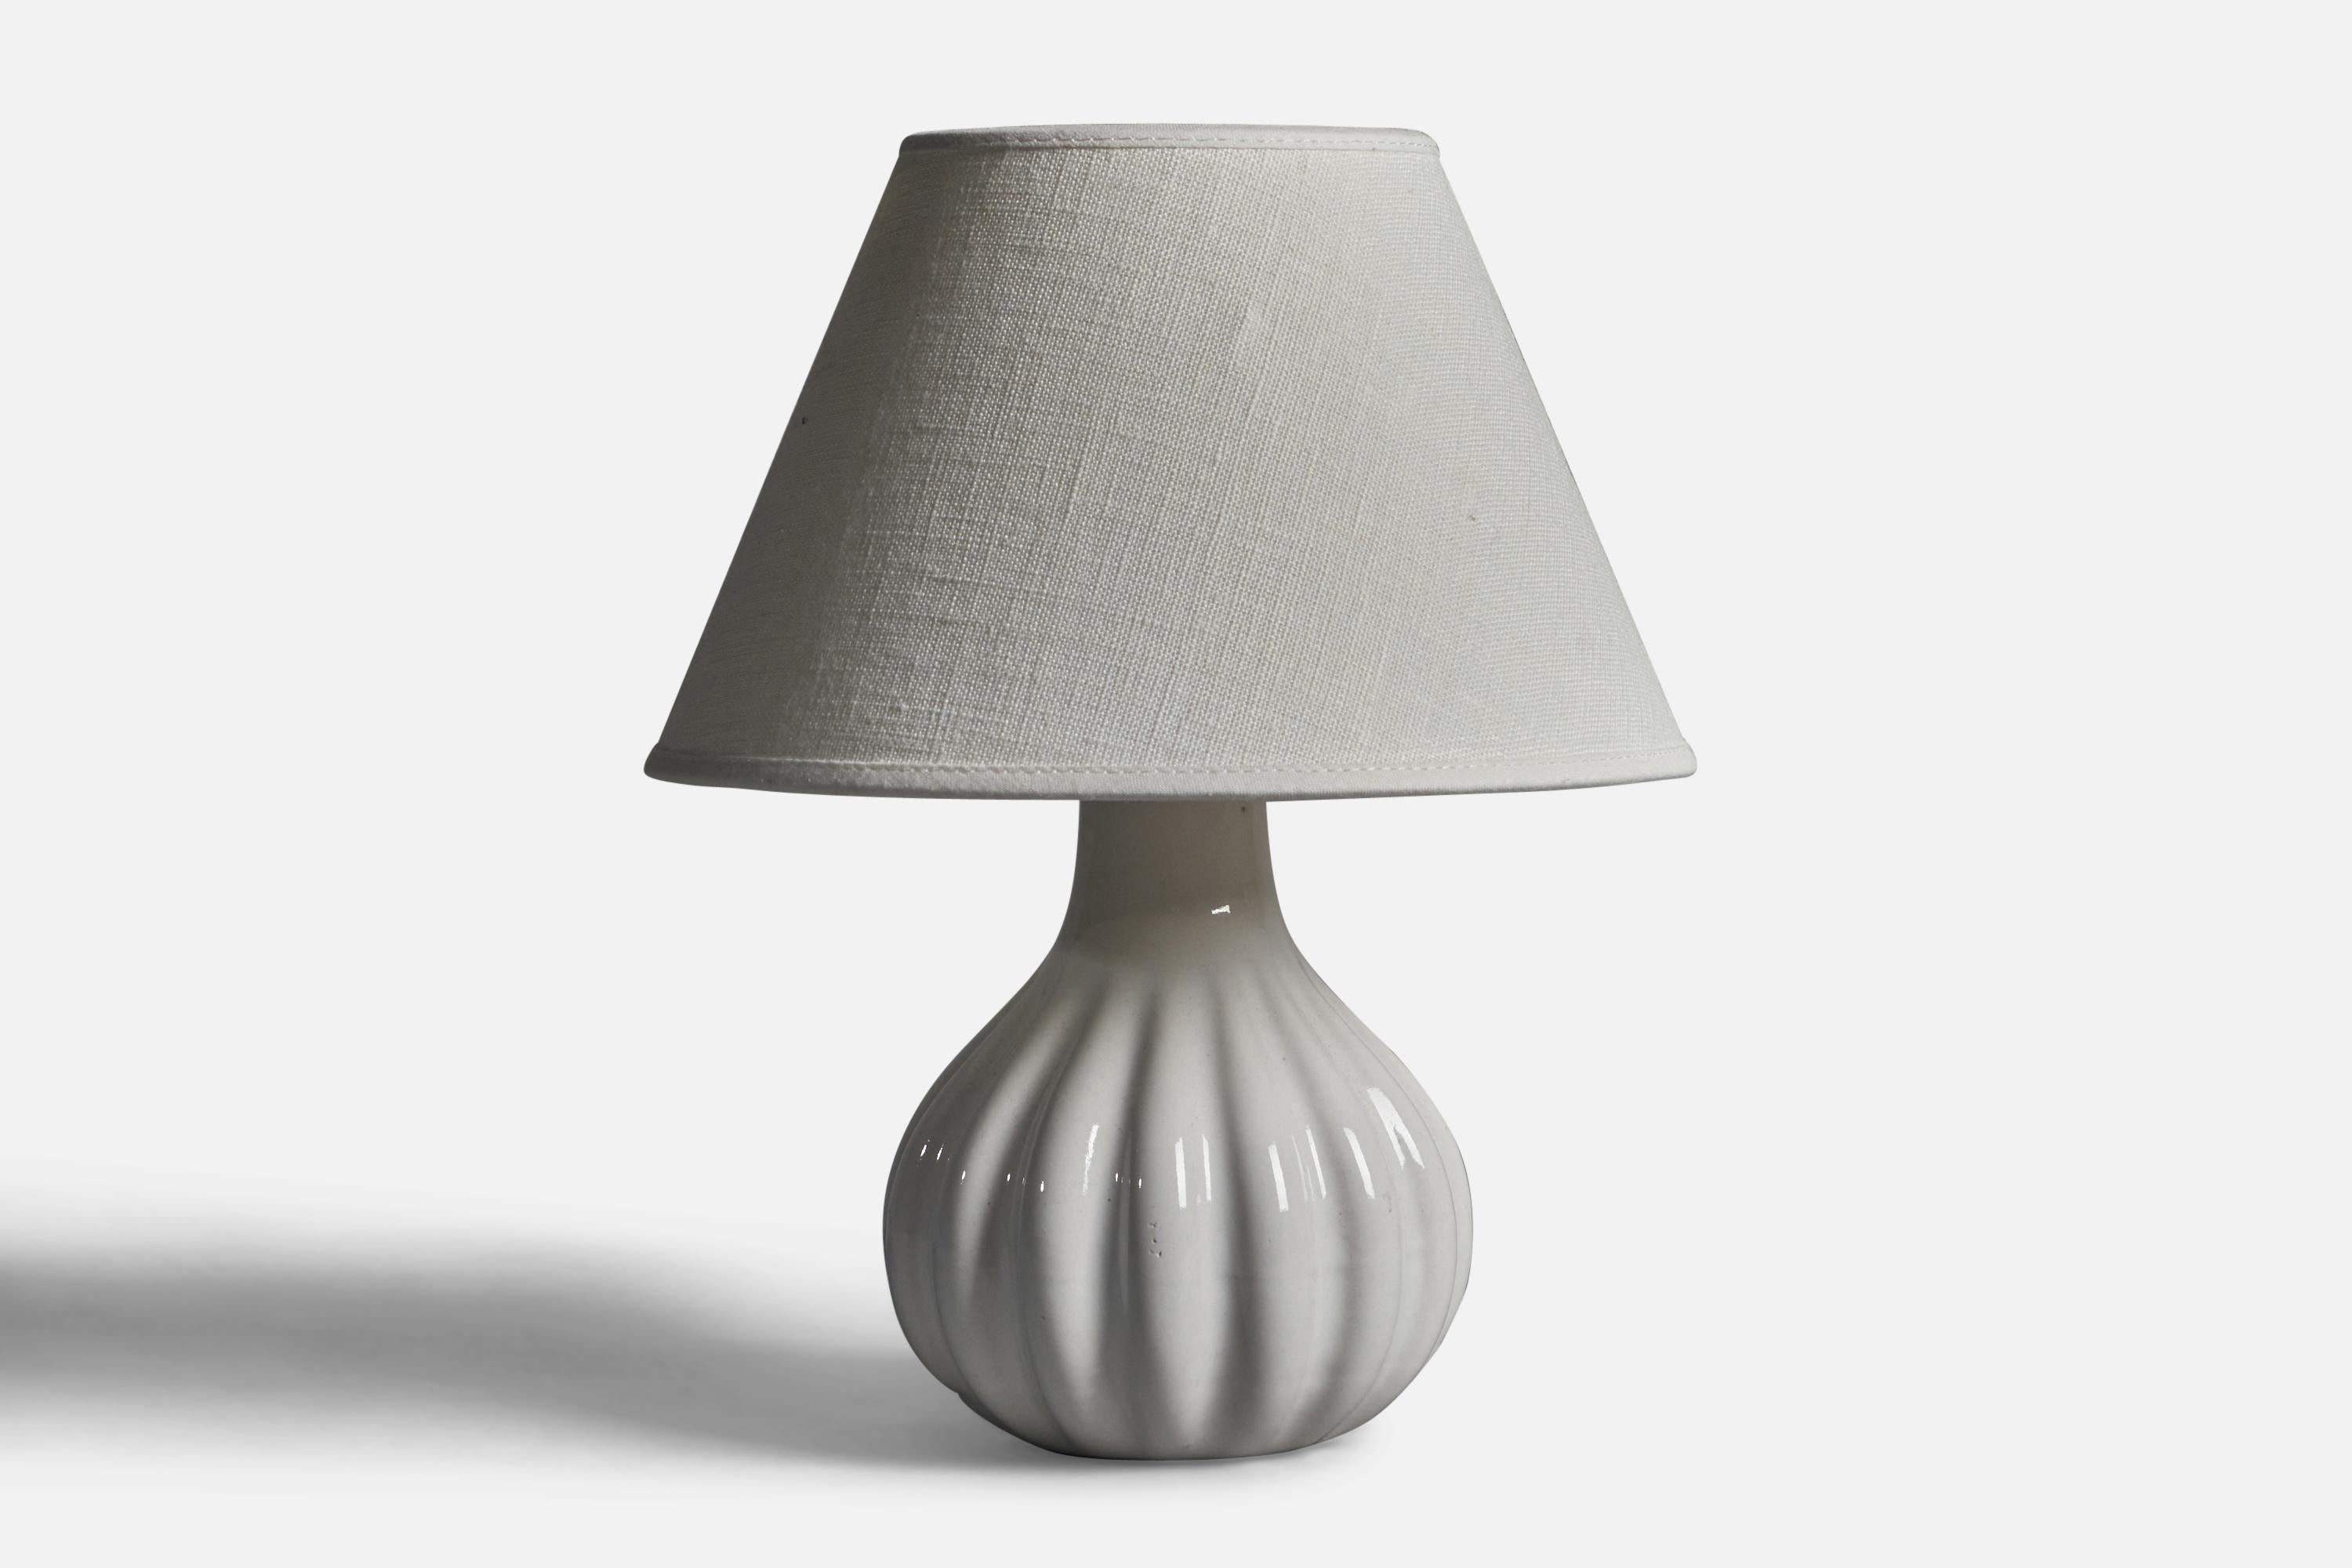 A grey-glazed fluted stoneware table lamp designed and produced in Sweden, 1960s.

Dimensions of Lamp (inches): 7.5